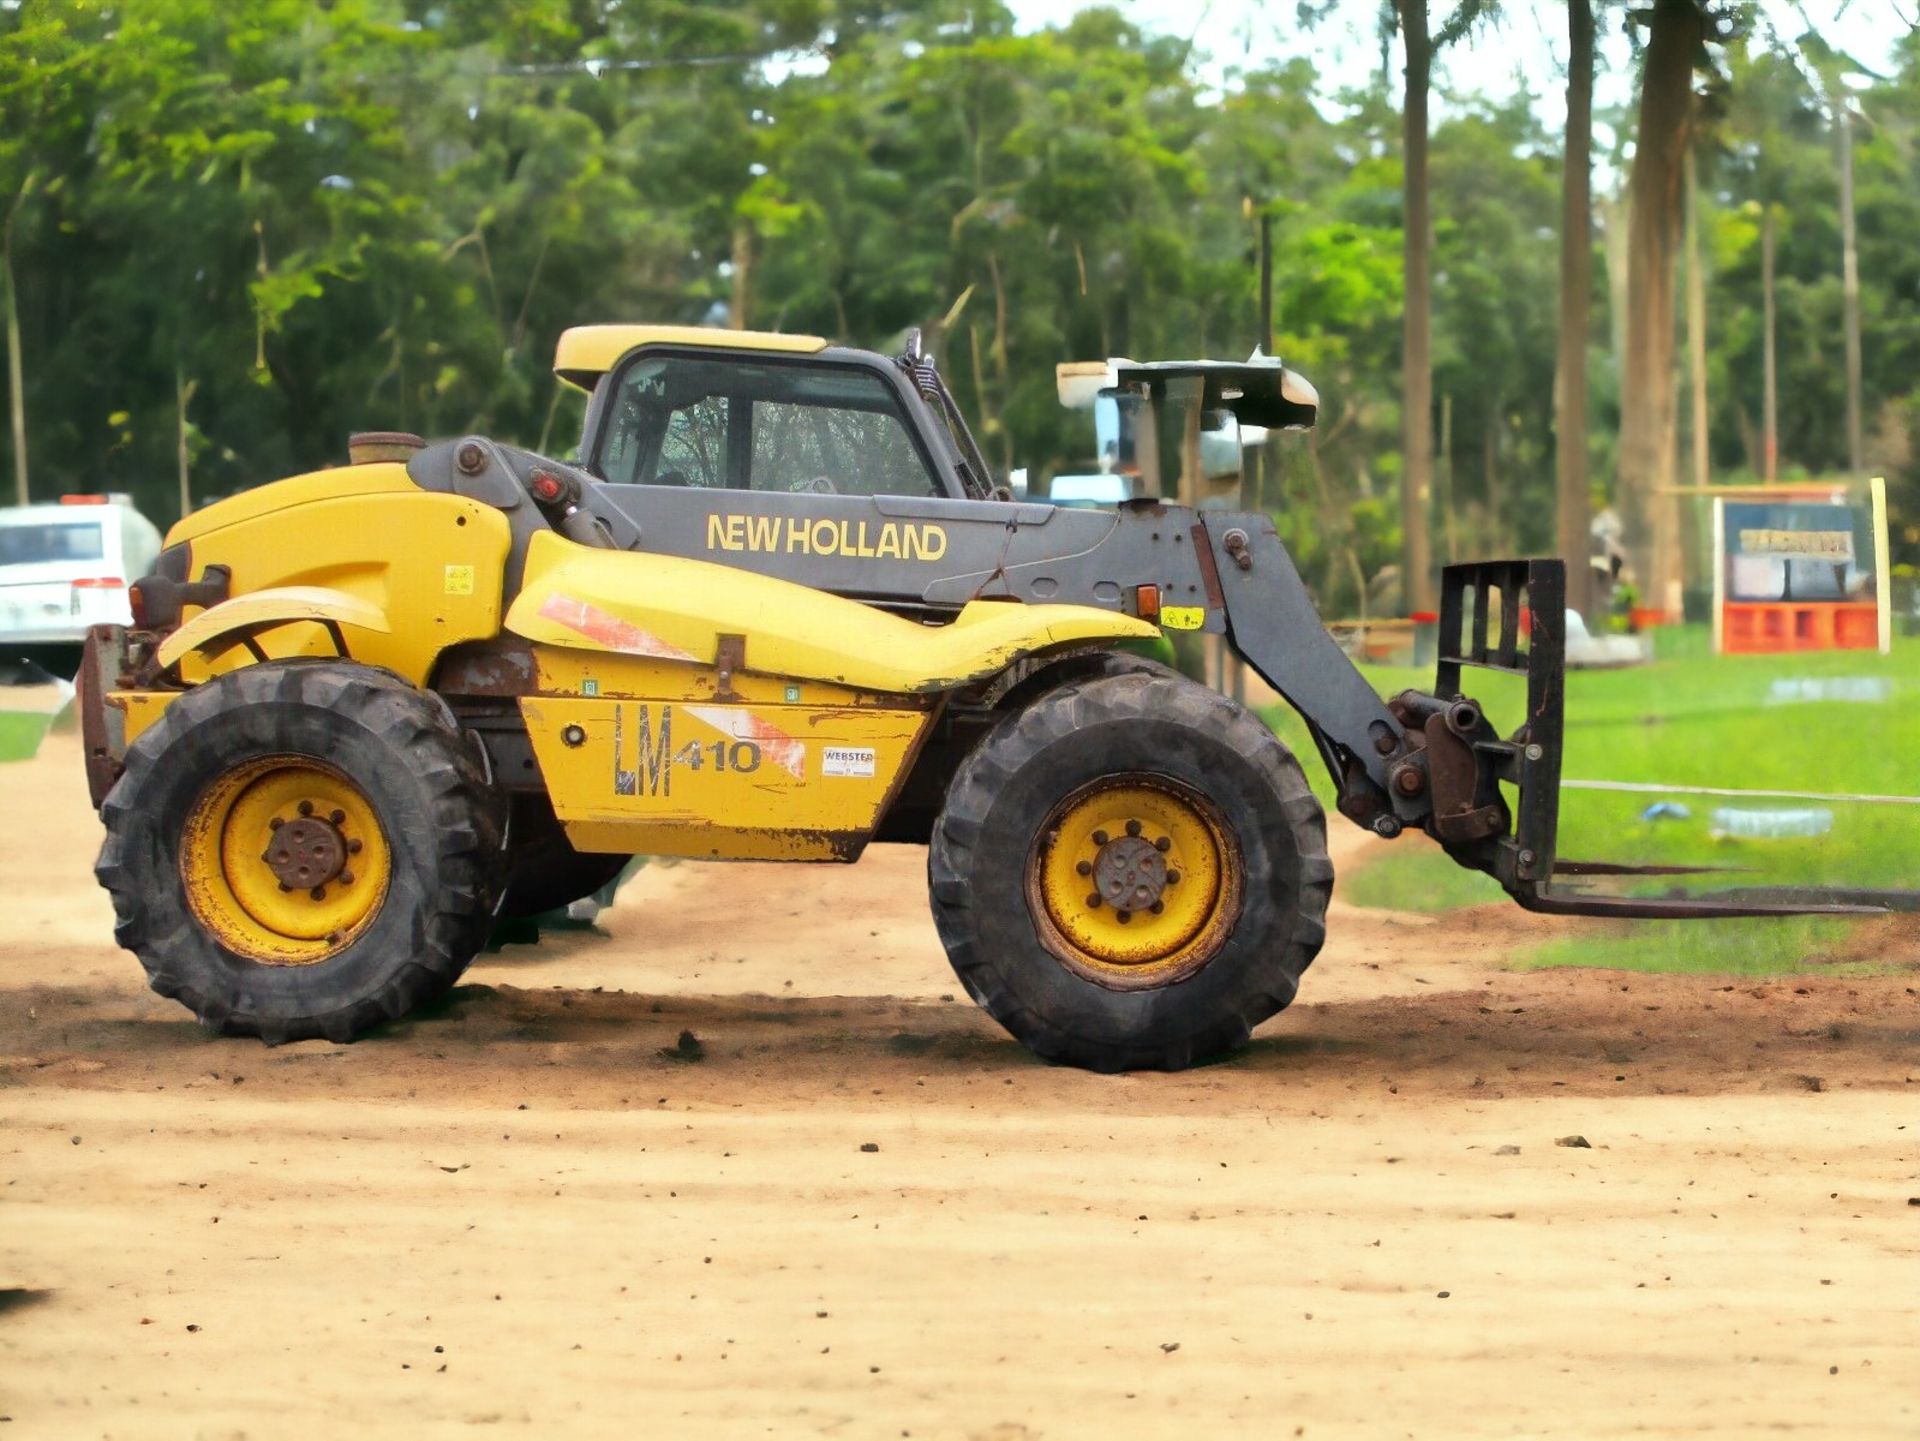 NEW HOLLAND LM410 TELEHANDLER - POWER, PRECISION, AND PERFORMANCE - Image 10 of 10